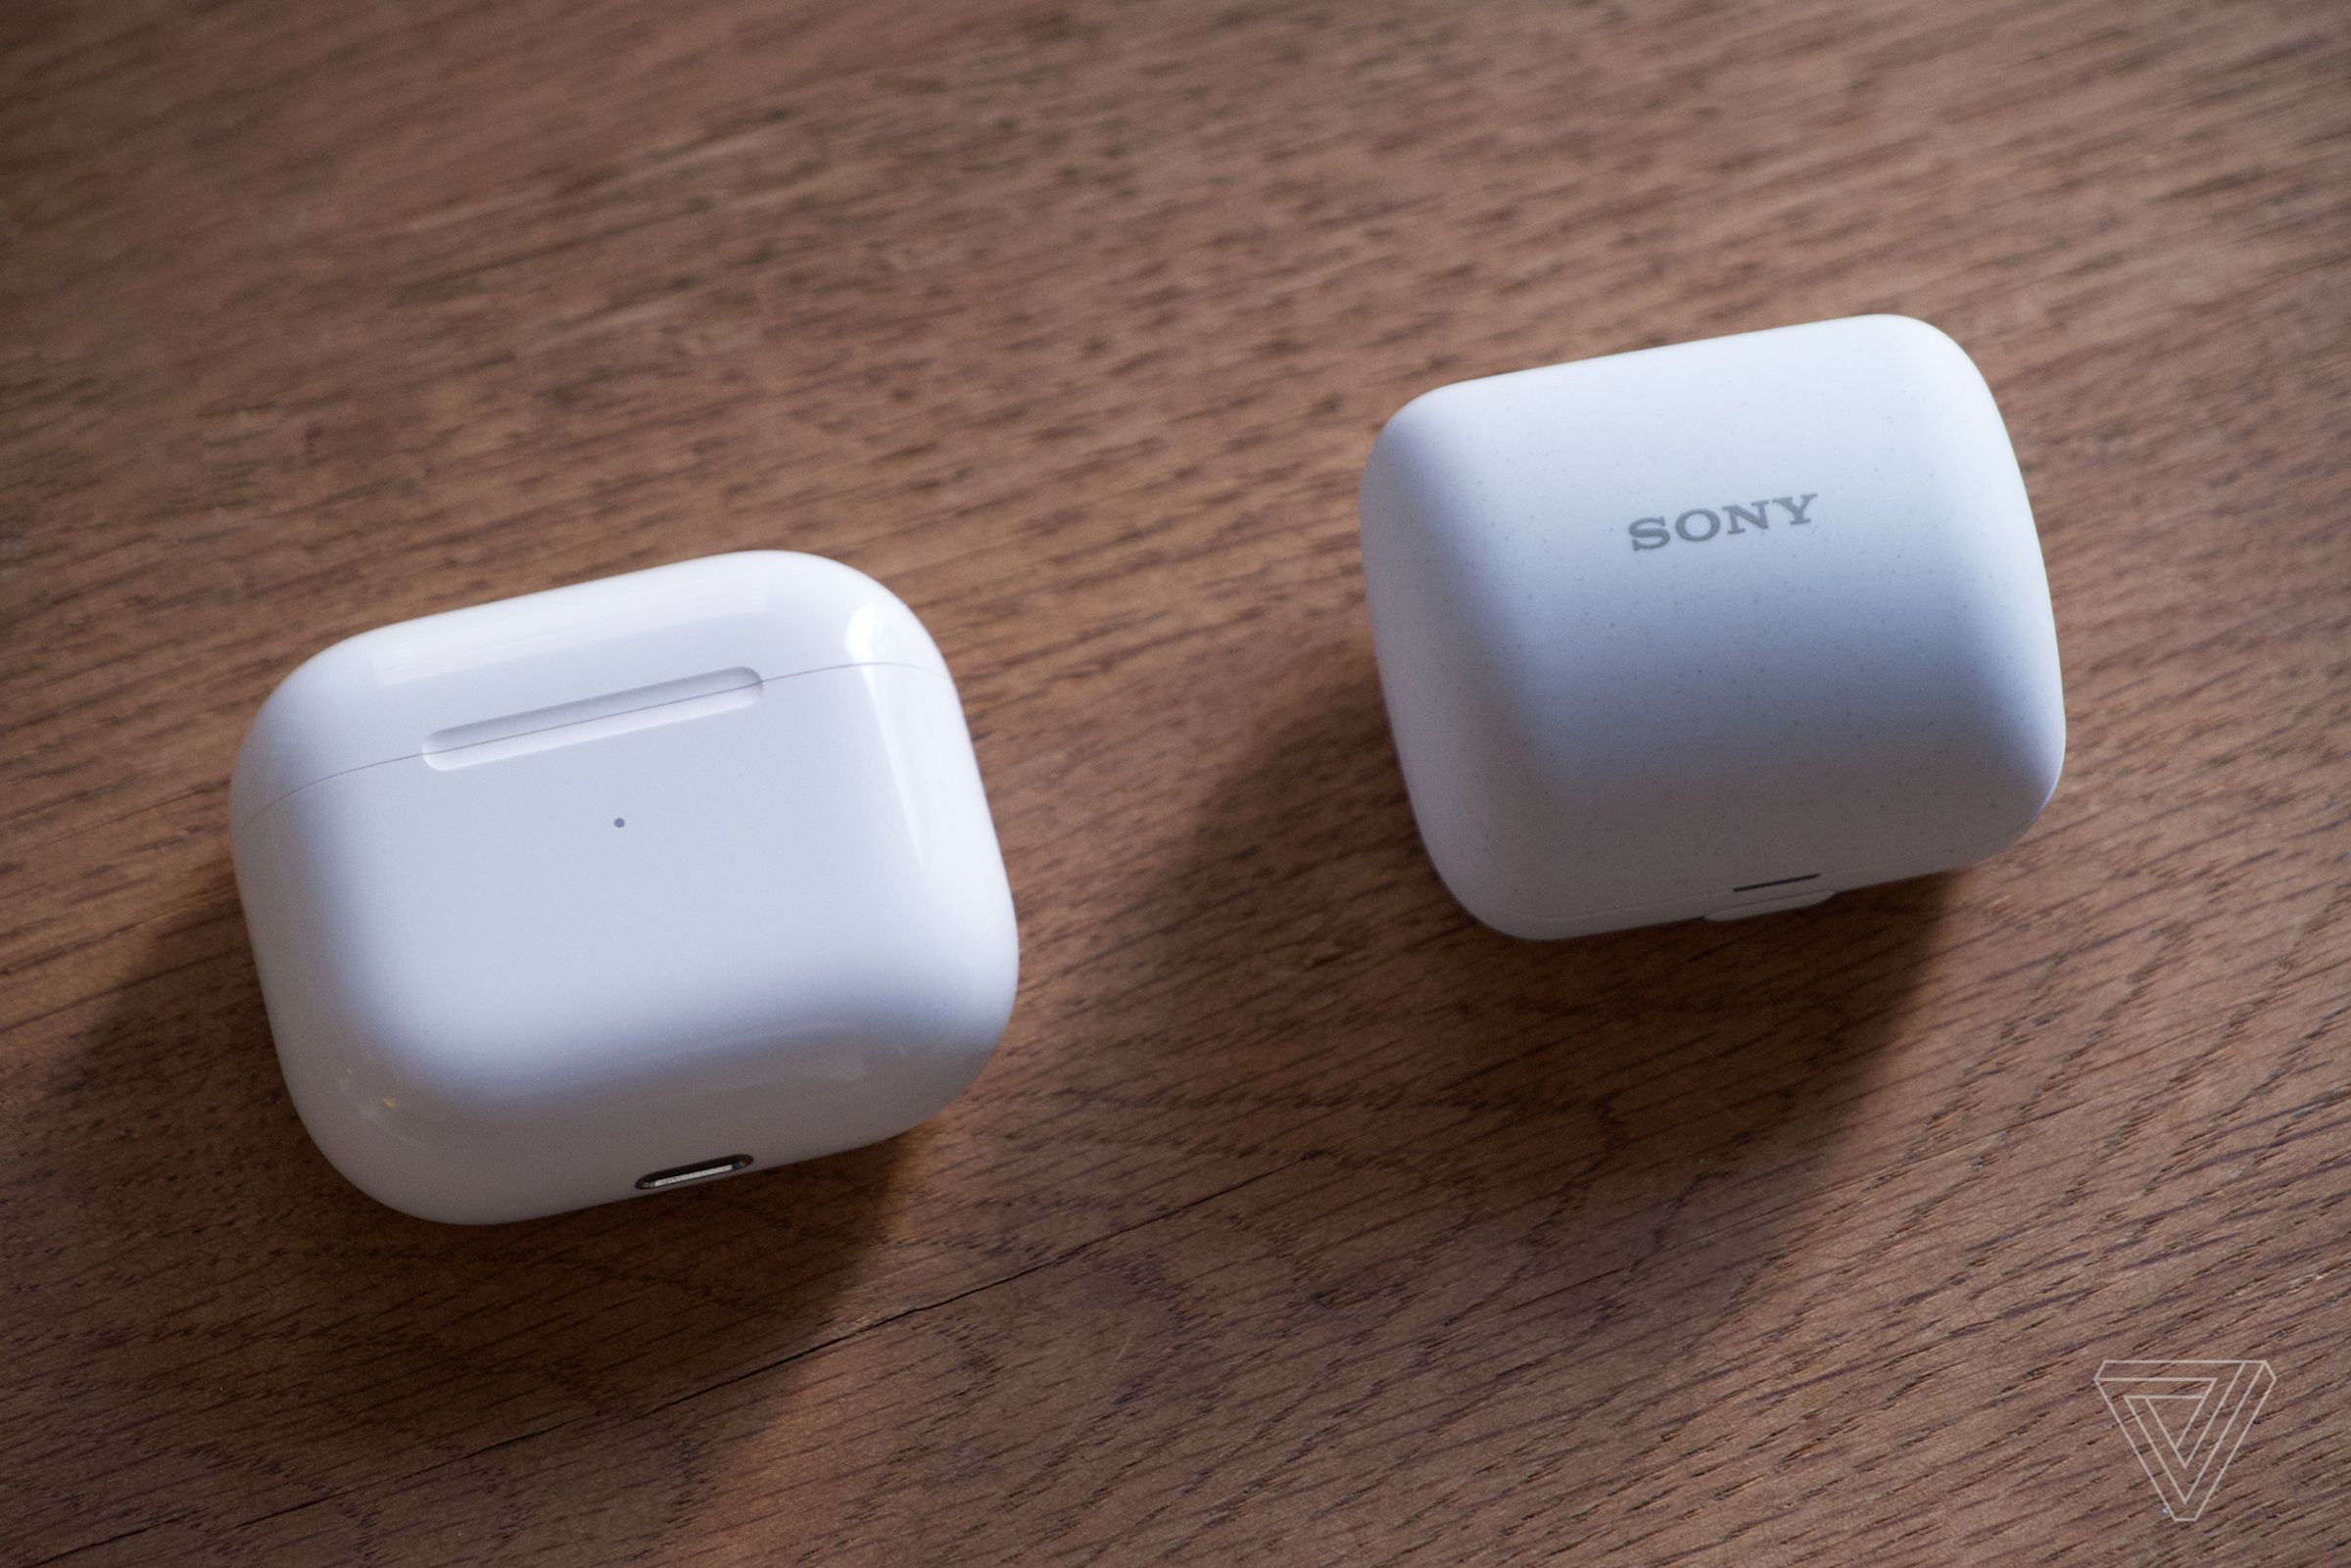 In some ways, the LinkBuds case is smaller than the AirPods case.